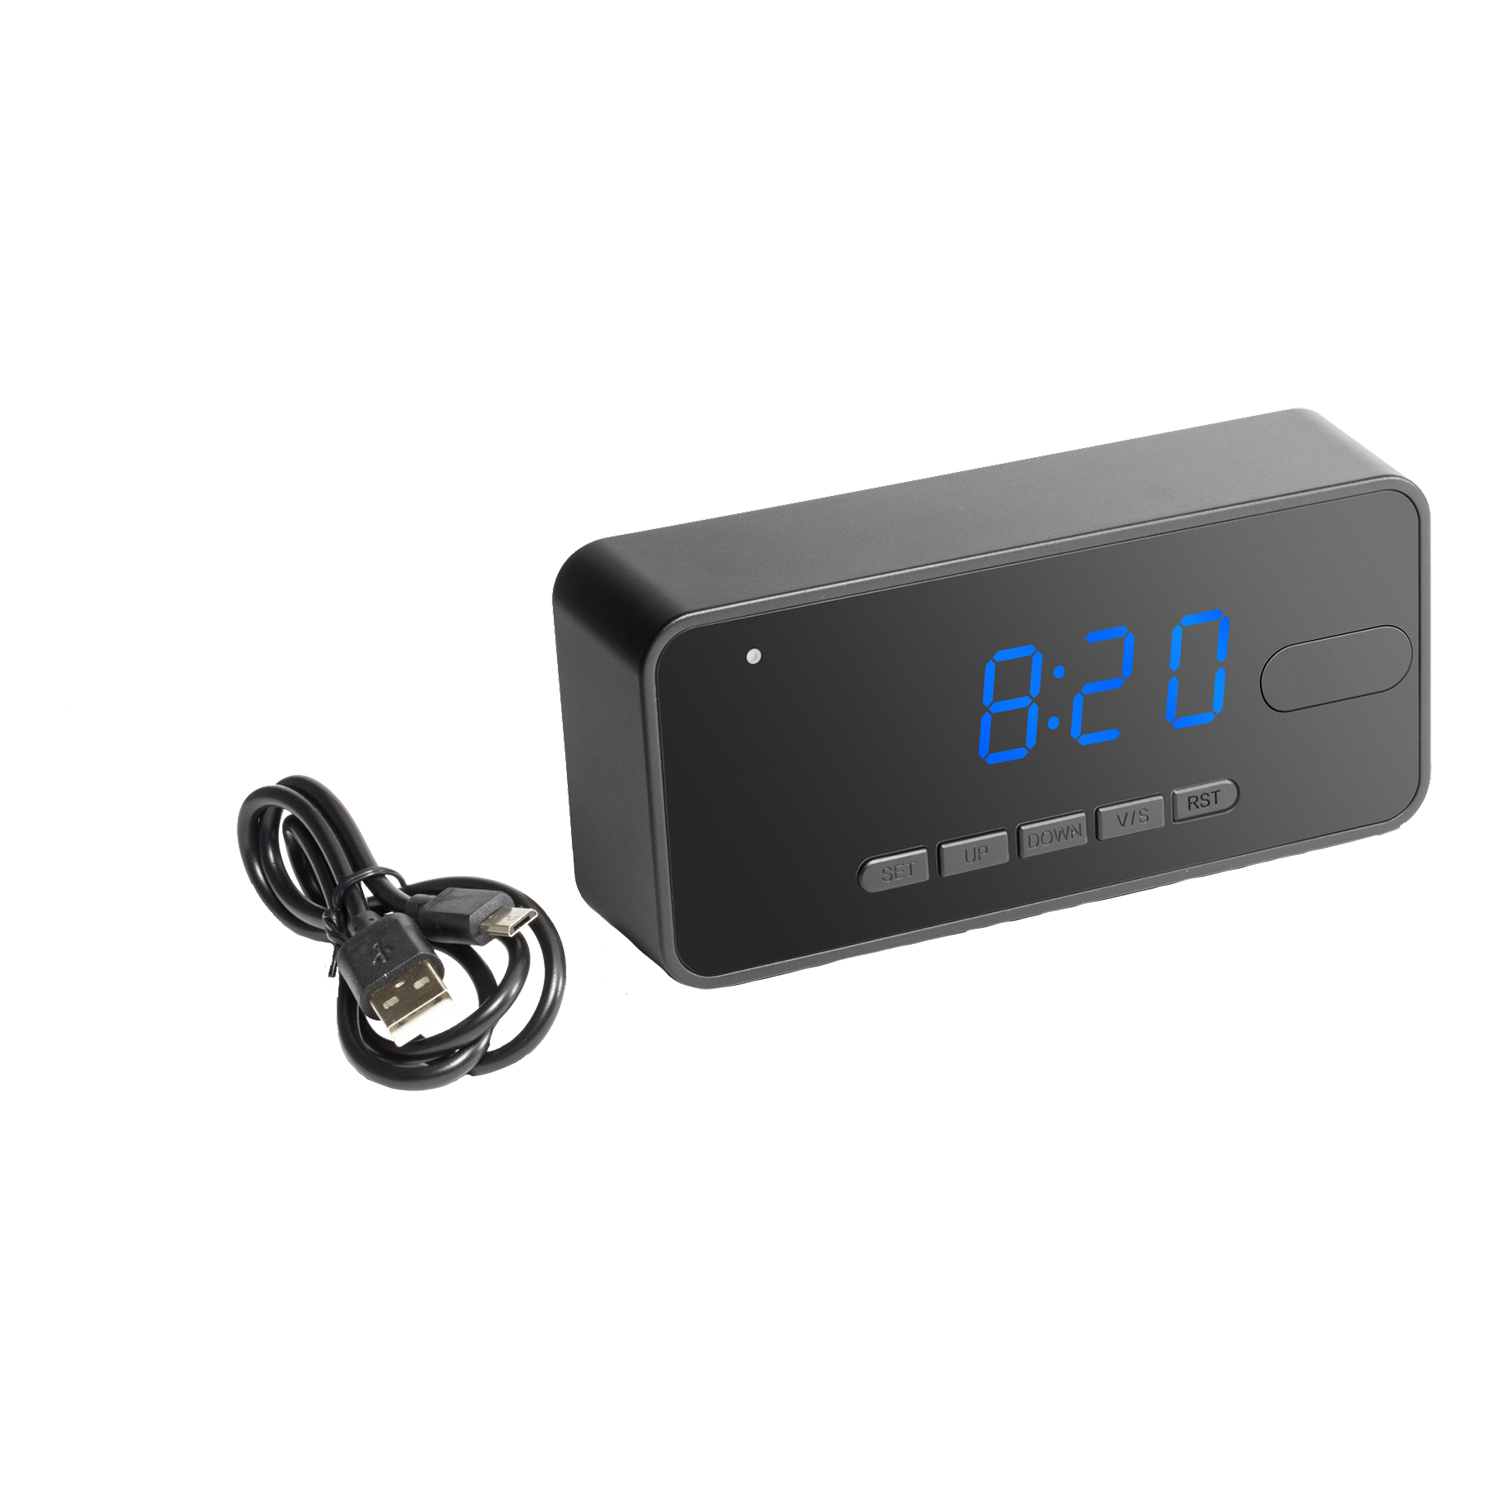 Technaxx Desk Clock with PIR and FHD Camera